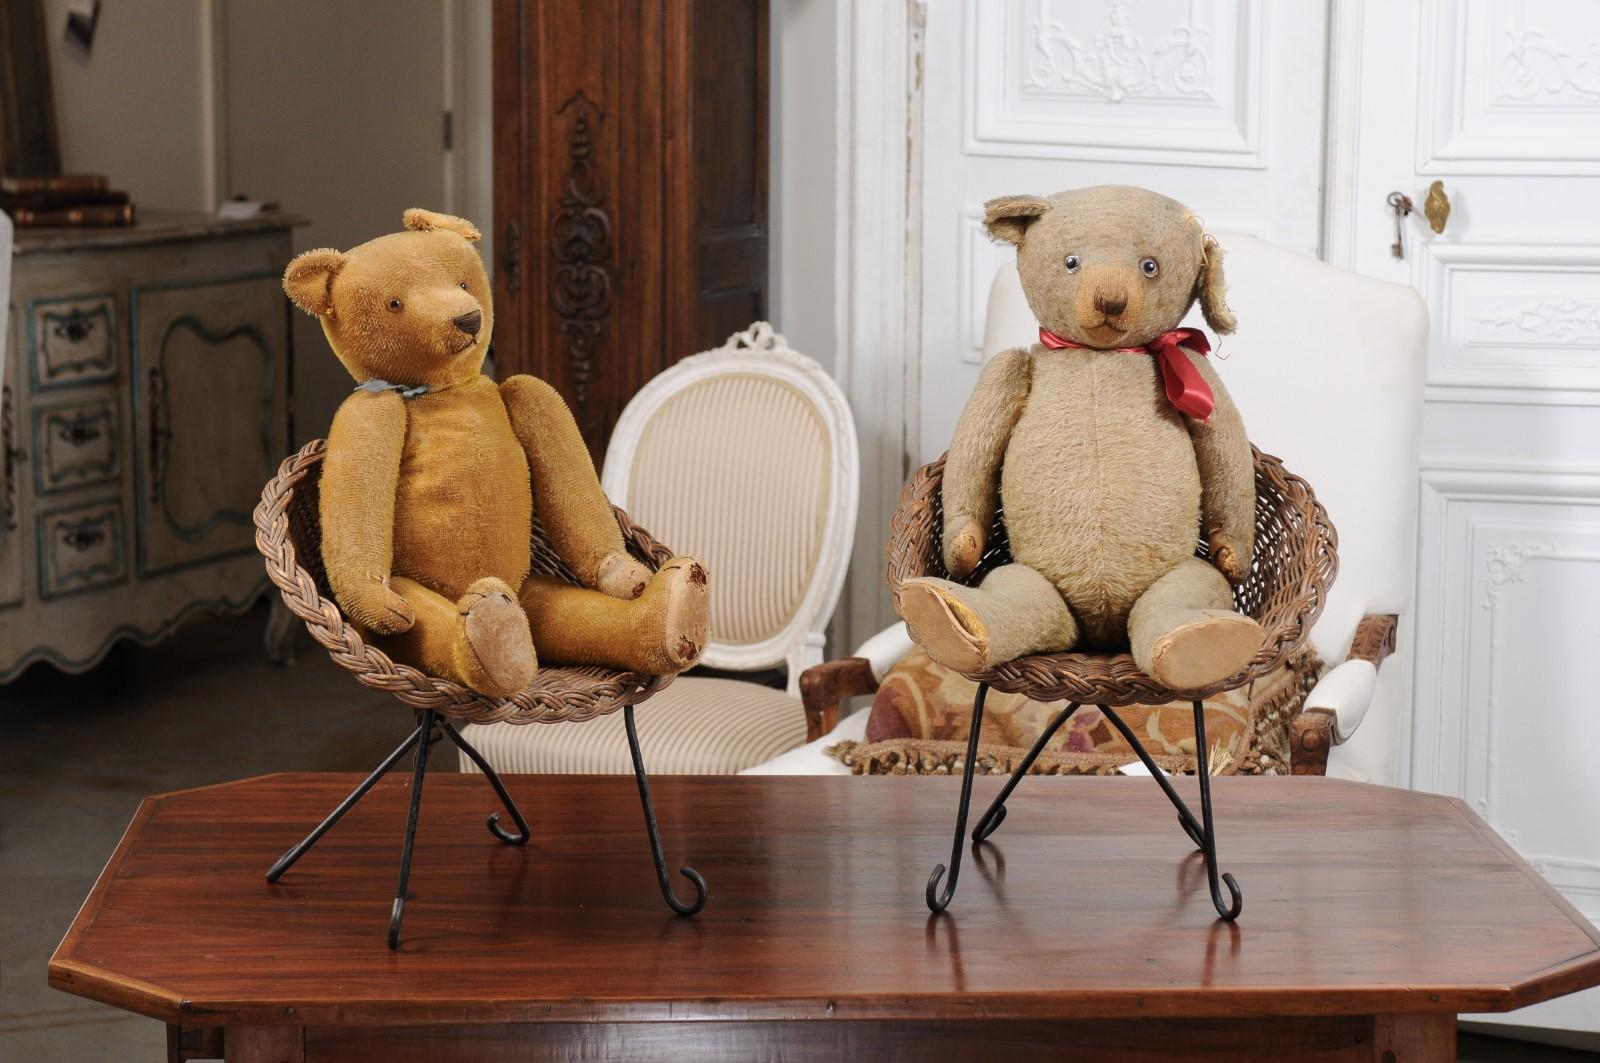 Two antique American teddy bears from the 20th century sitting in wicker chairs, priced and sold individually $495 each. Made in the USA during the 20th century, each teddy bear melts our hearts with its nicely weathered appearance revealing its